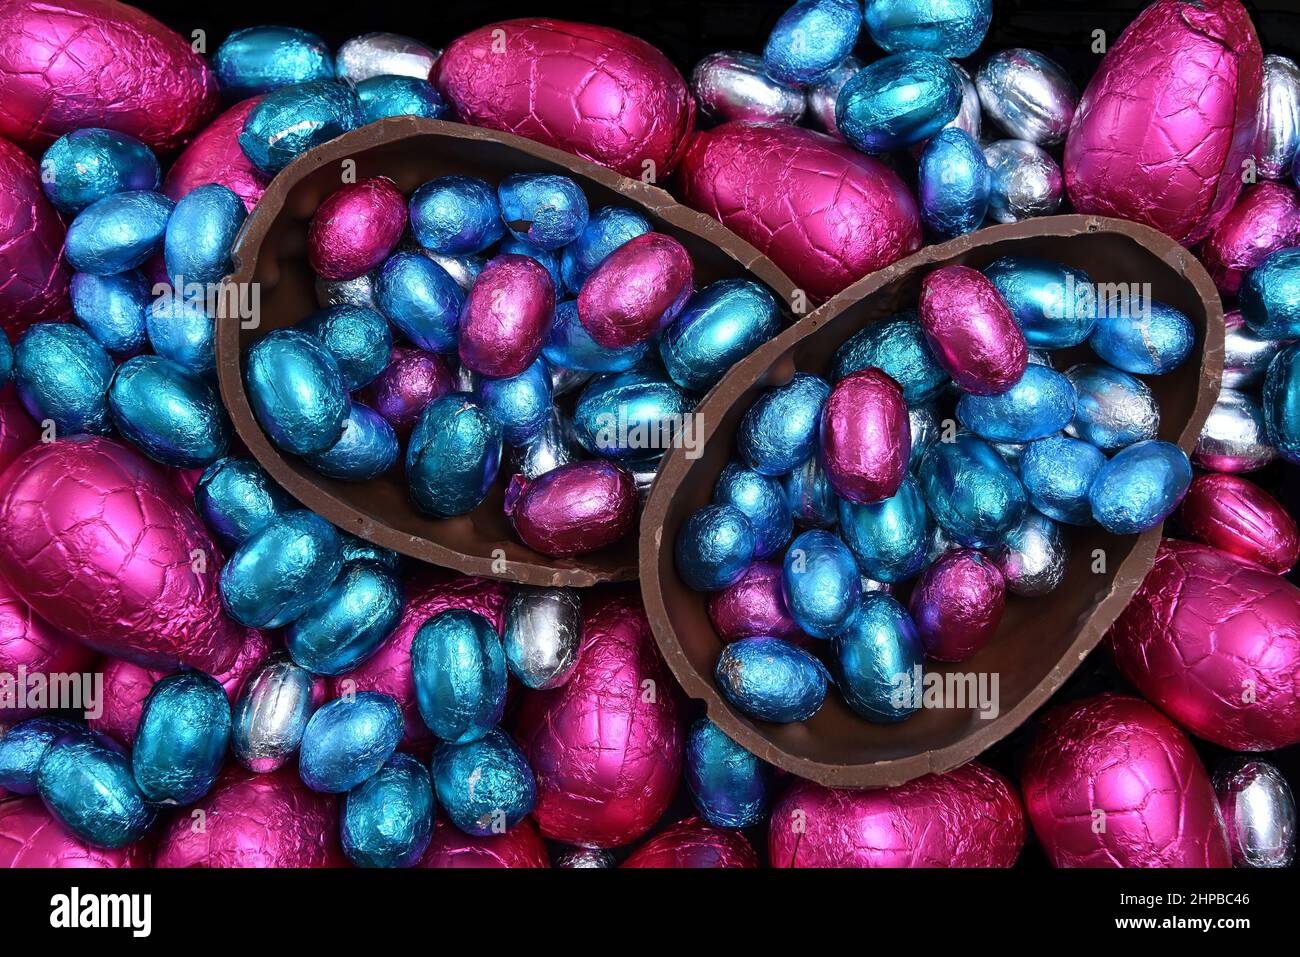 Pile of different sizes of colourful foil wrapped chocolate easter eggs in pink, red, silver and blue with two halves of a large chocolate egg. Stock Photo